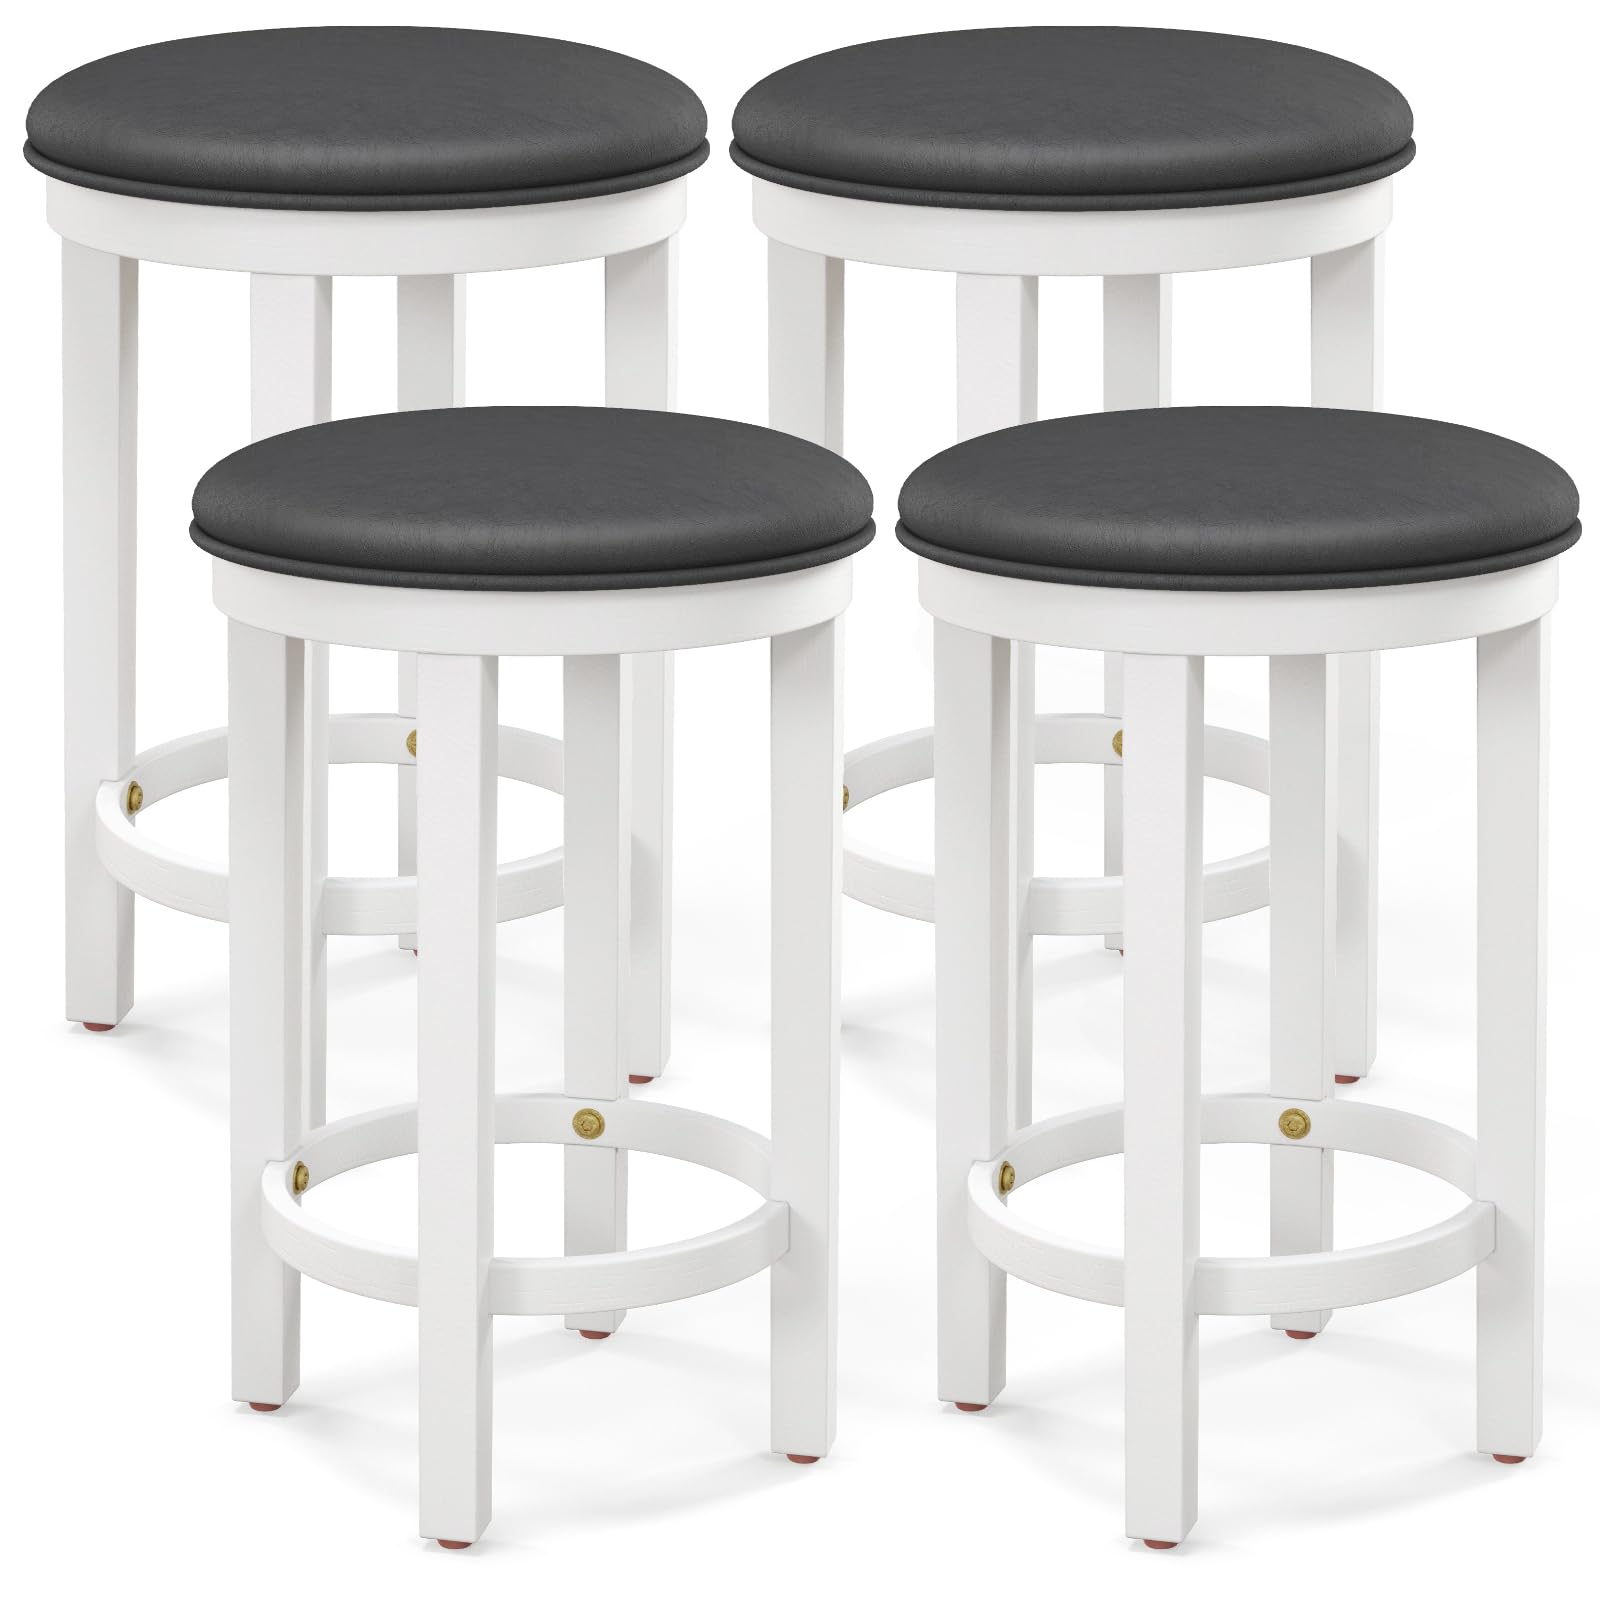 Giantex Bar Stools Set, 25-Inch Counter Height Stools with Round Seat, Footrest, Wooden Frame